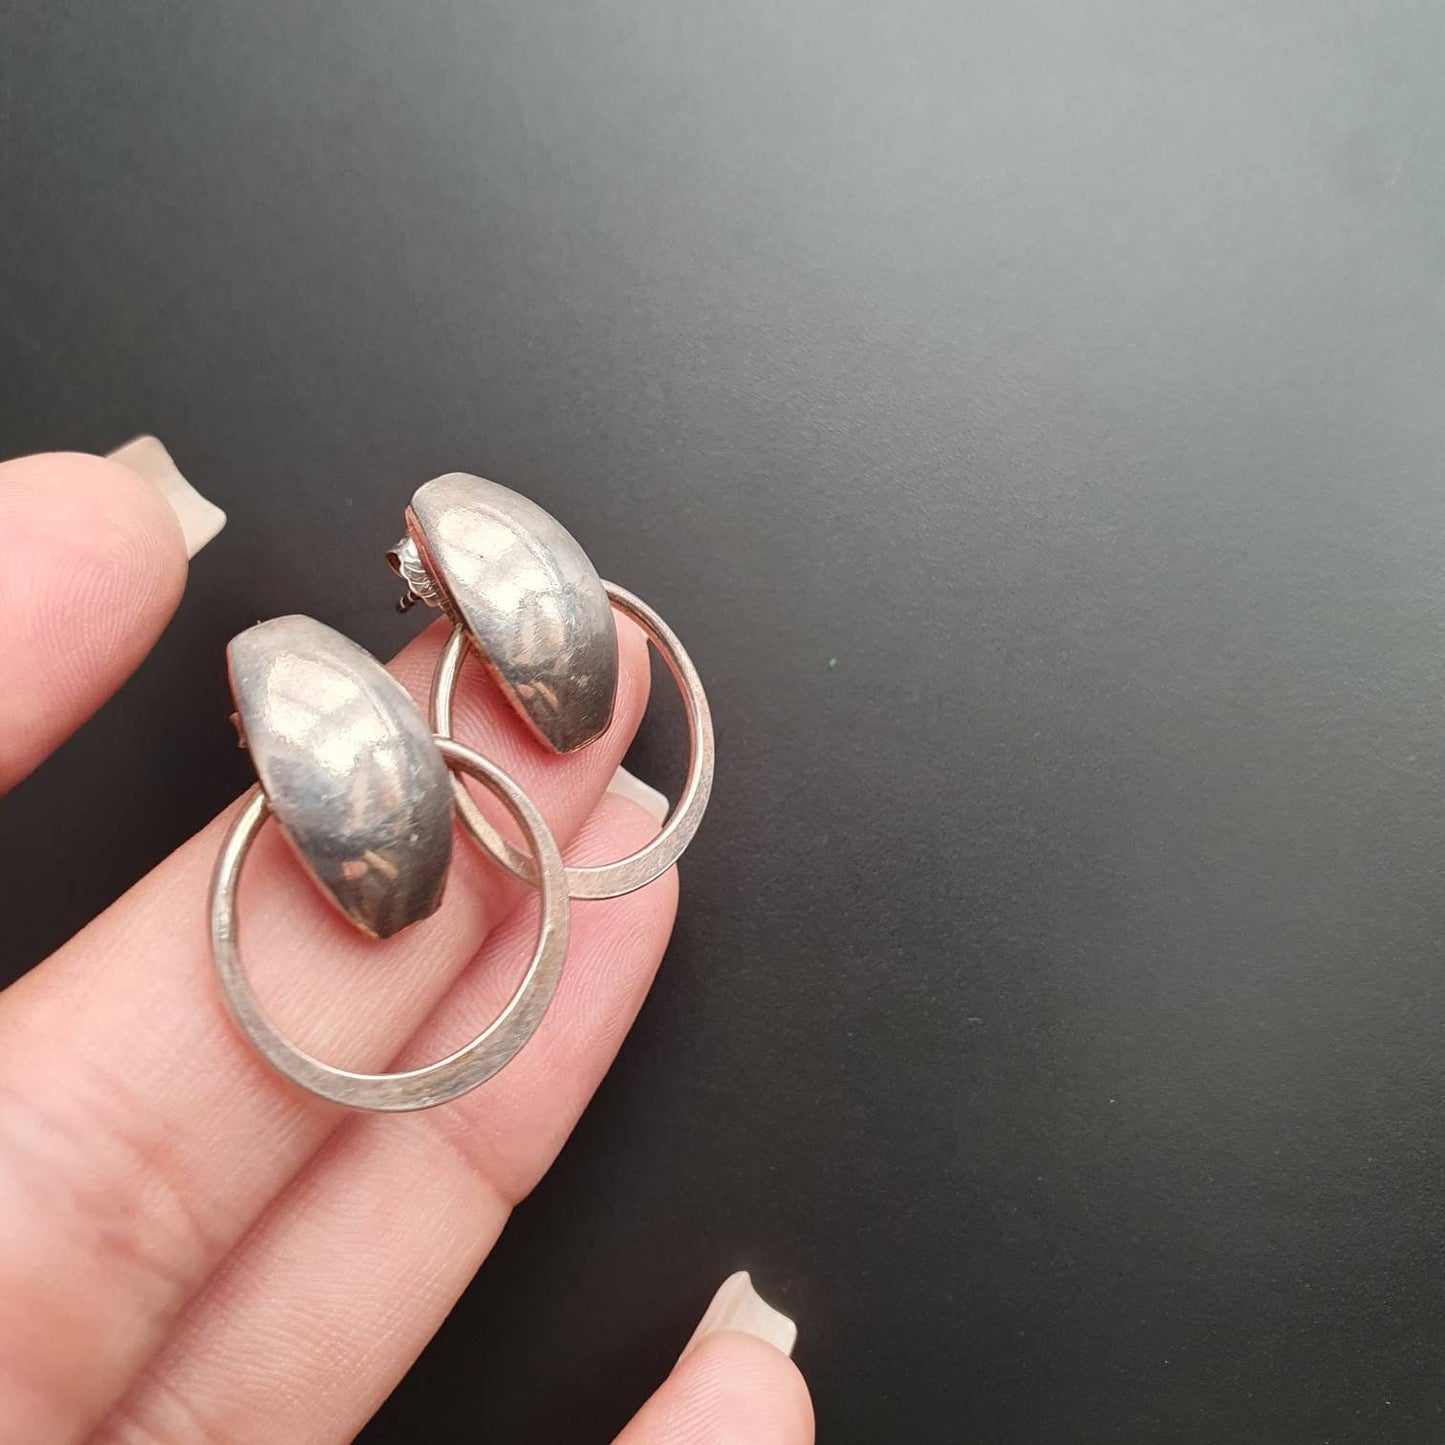 Vintage stud earrings, sterling silver earrings, silver earrings, studs,stud earrings, hoop studs, gifts for all occasions,